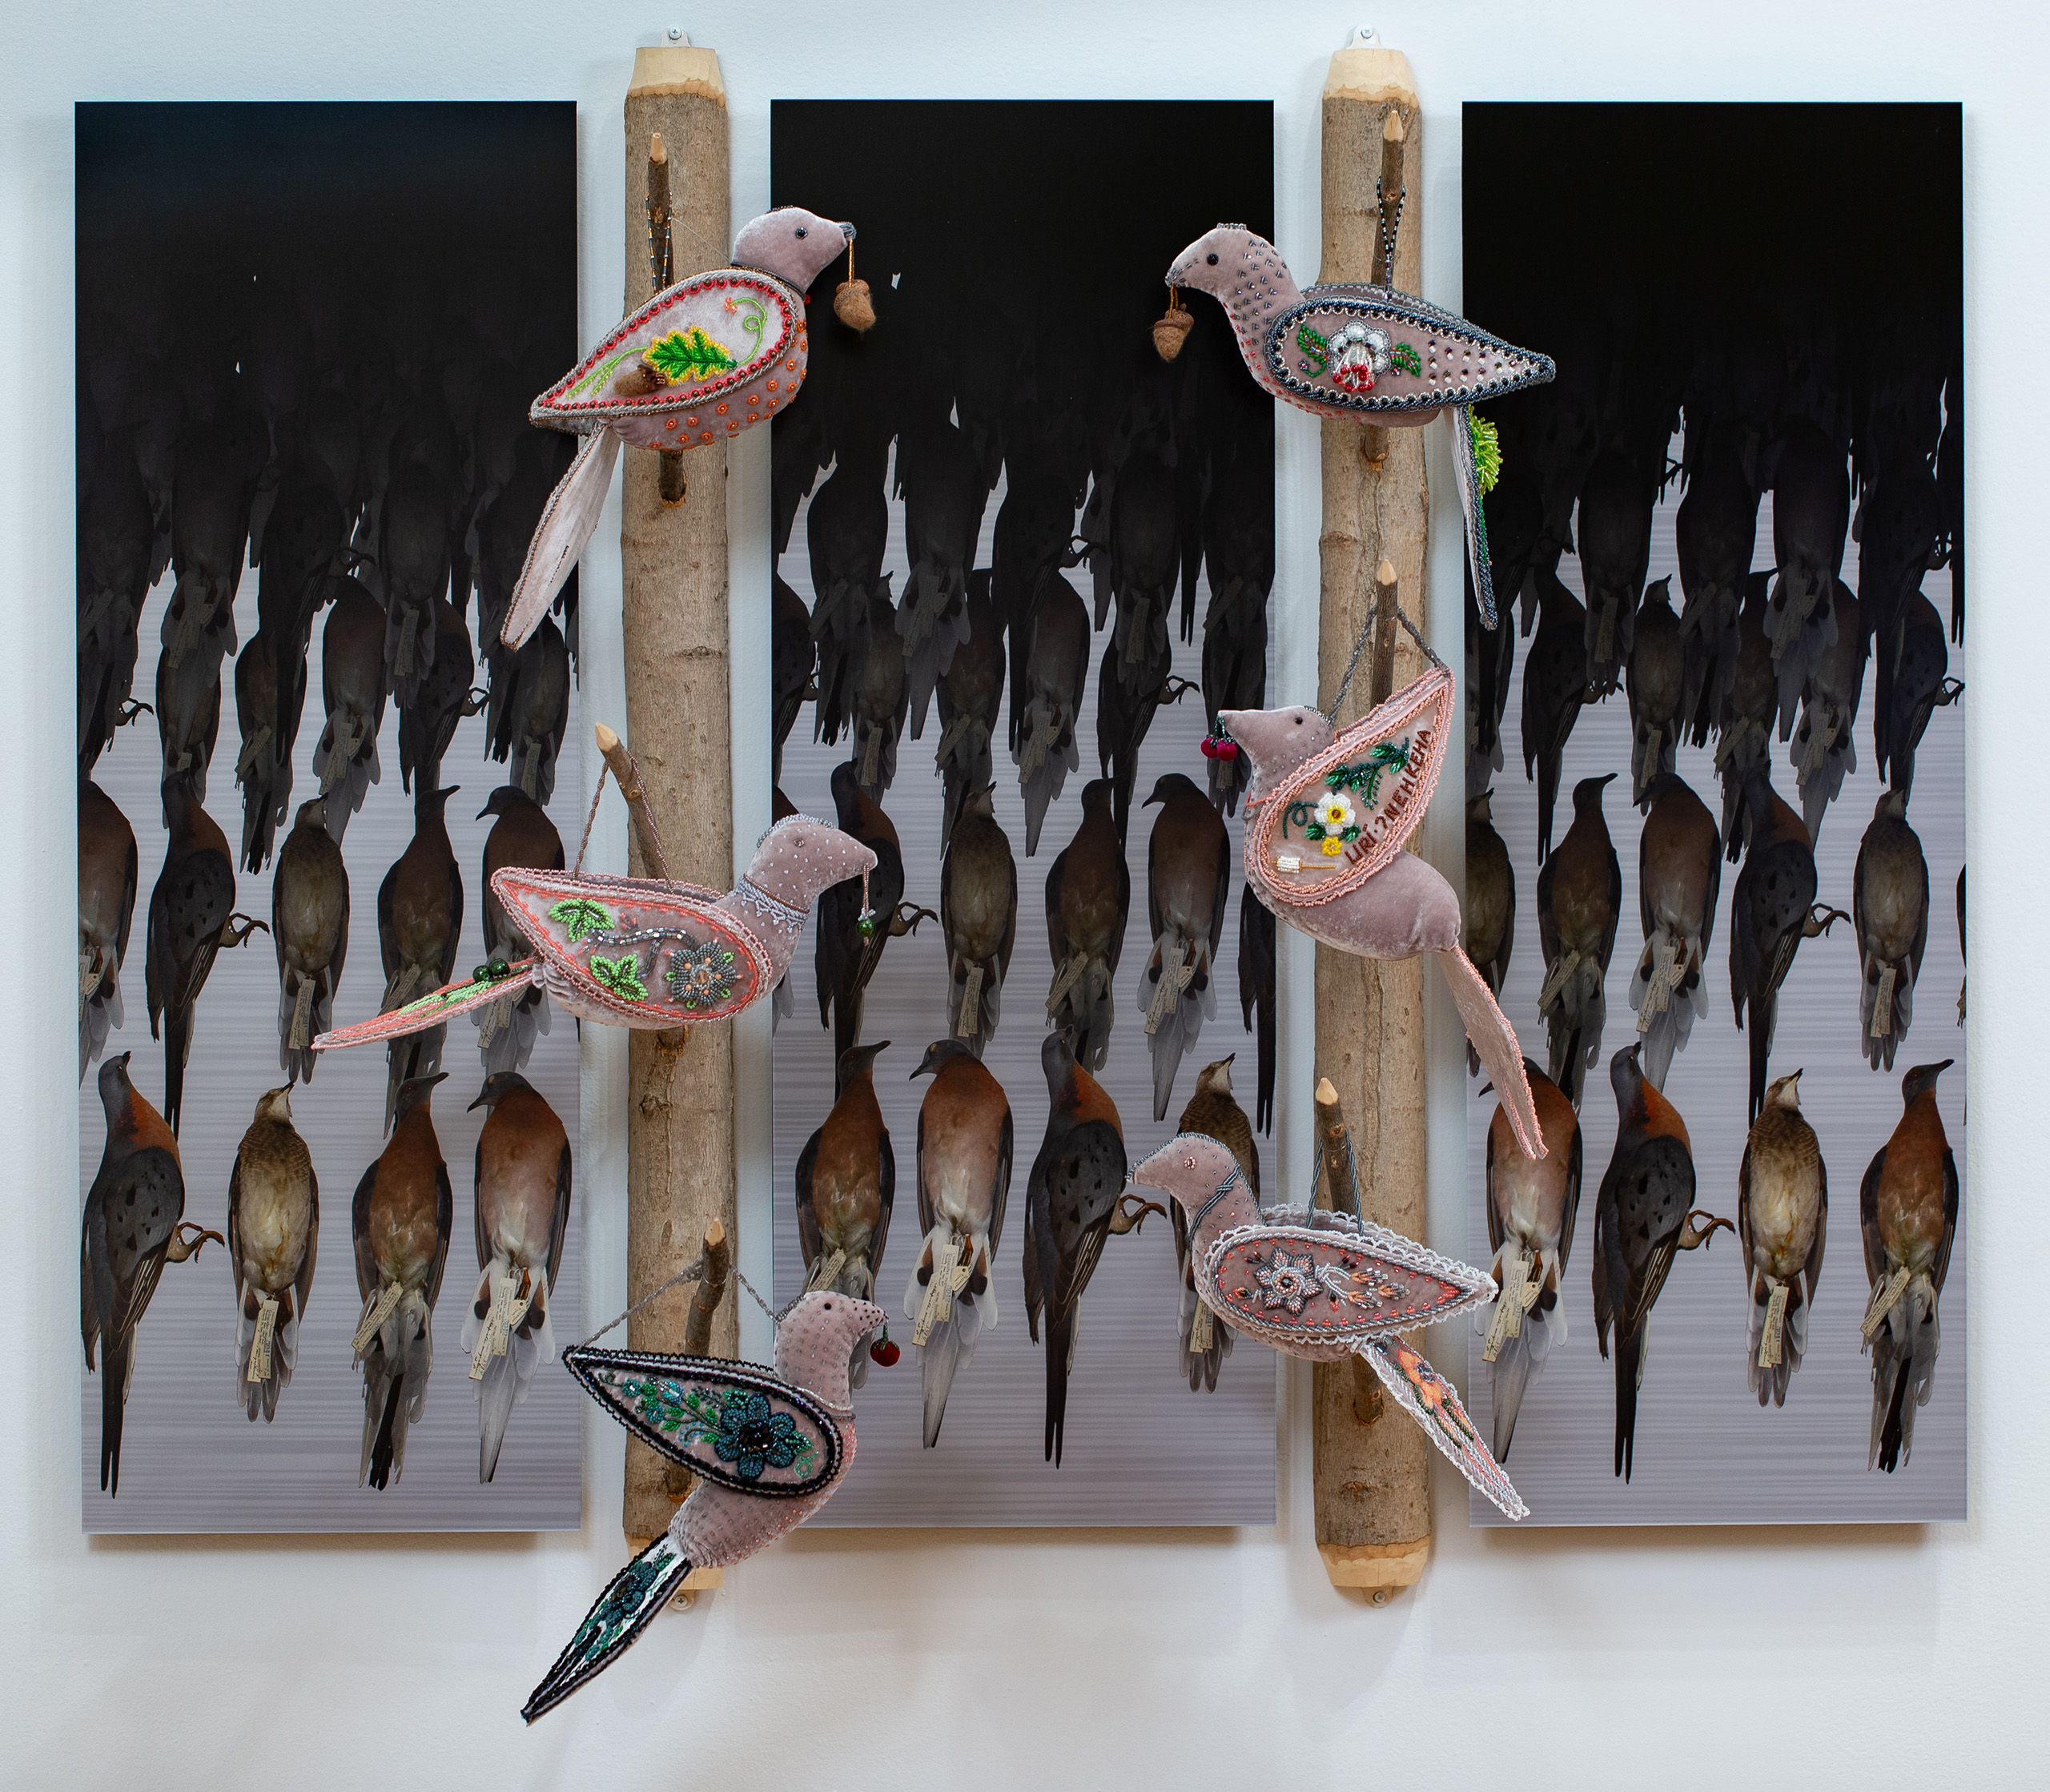 A repeating image of birds fading from color to black is divided into three parts by vertical tree branches on which decorative beaded birds are hung